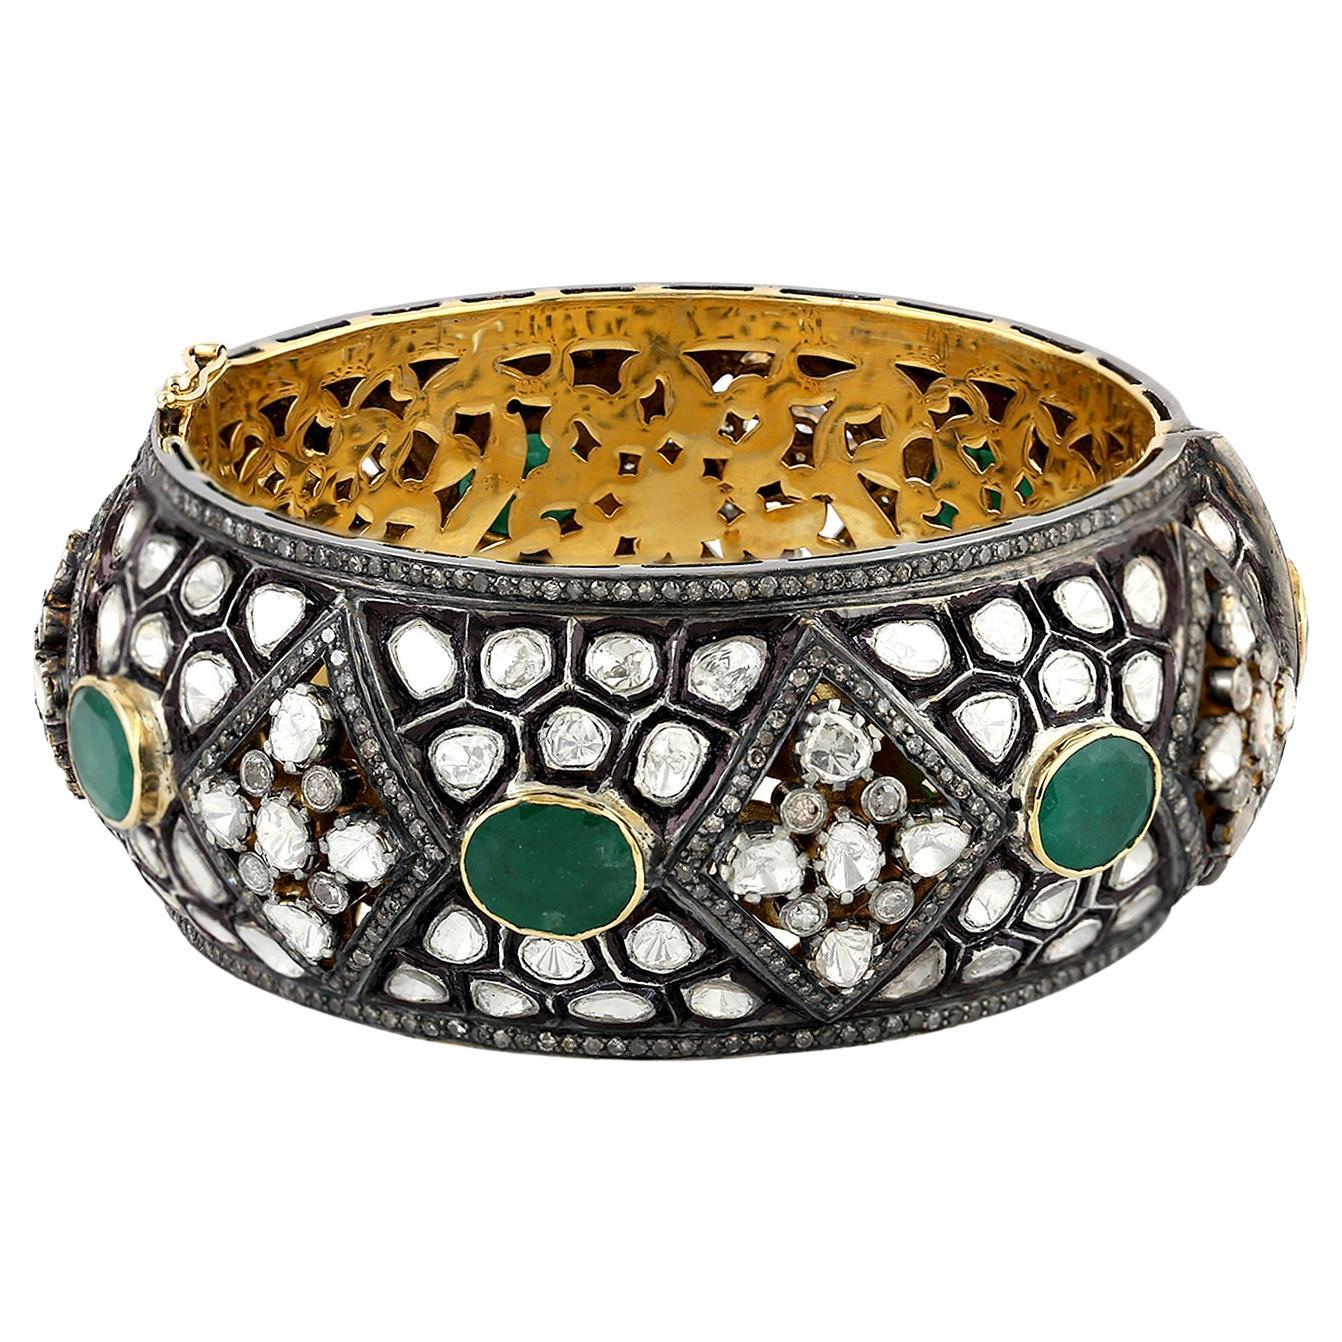 Emerald & Rose Cut Diamonds Bangle with Carved Grill Made in 14k Gold & Silver For Sale